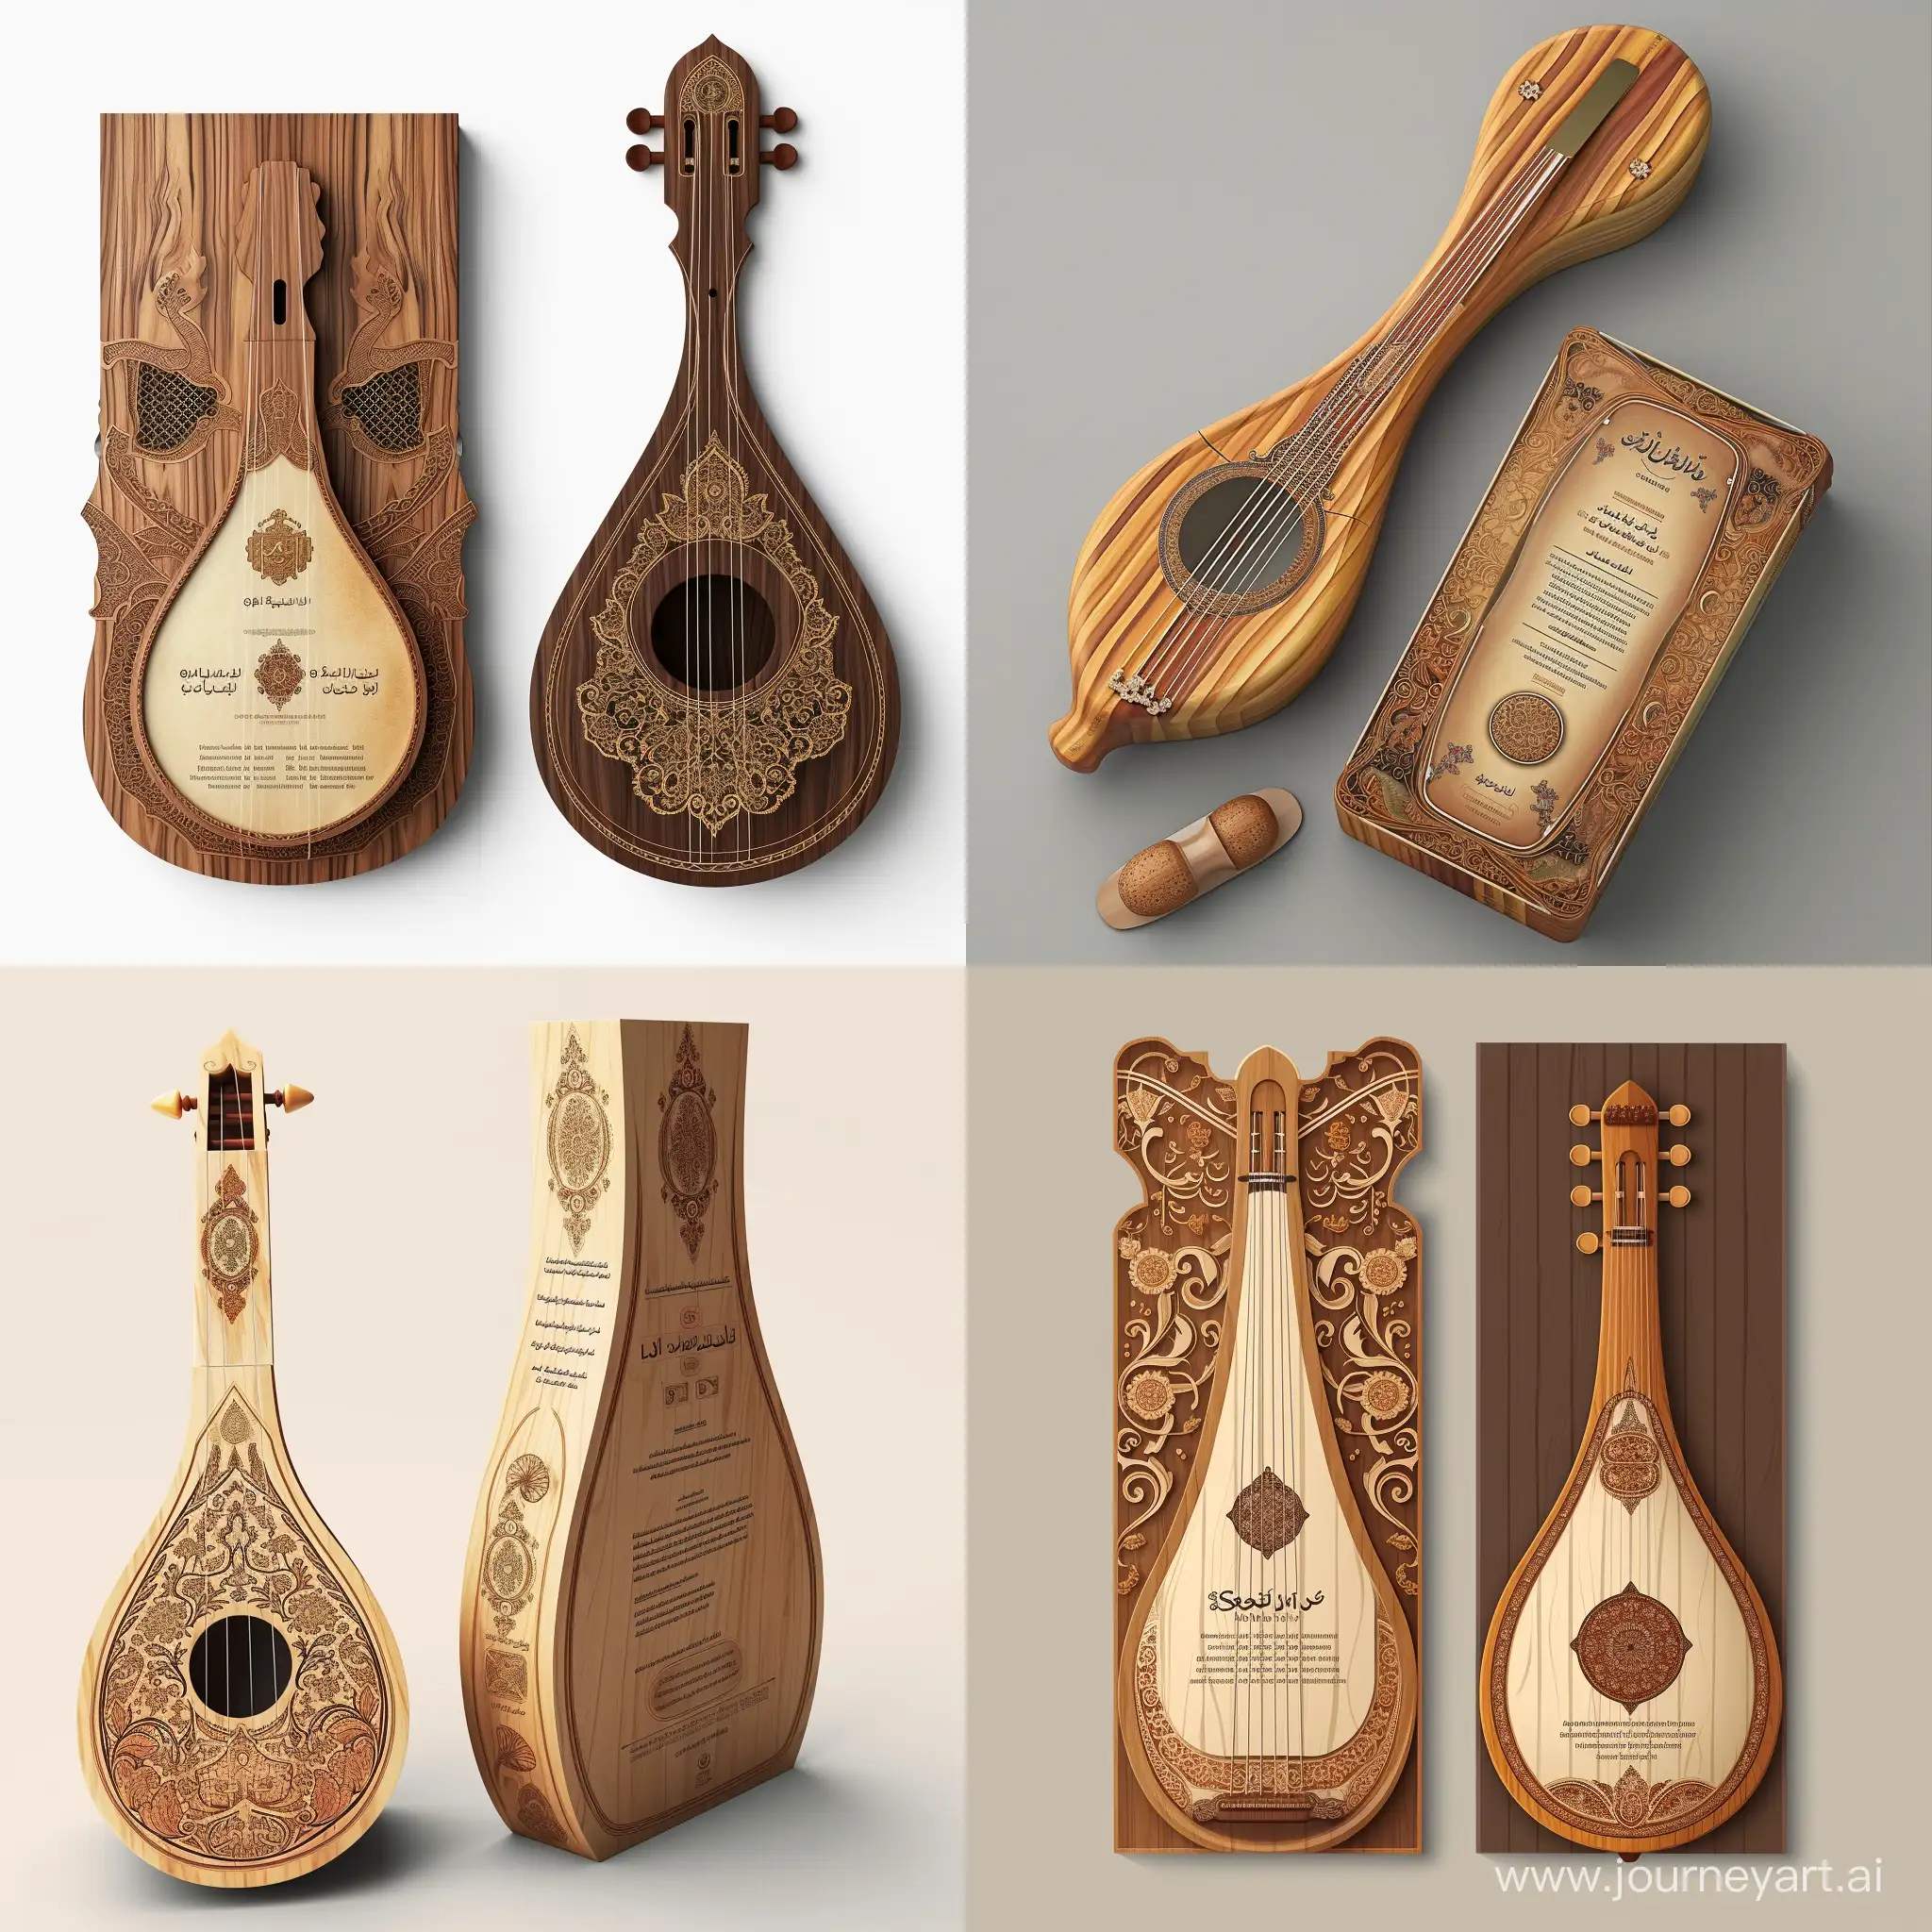 Imagine an image of packaging shaped like a Setar or Daf, using earthy, wooden colors with ornate details. The material should be wood or wood-effect for authenticity, featuring elements mimicking the instrument's strings or skin in the graphics. Use an elegant, traditional font for the text. Vary the size based on the instrument, including a history of the instrument and product information. Celebrate Iran's musical heritage to attract customers interested in music and cultural uniqueness.realistic style